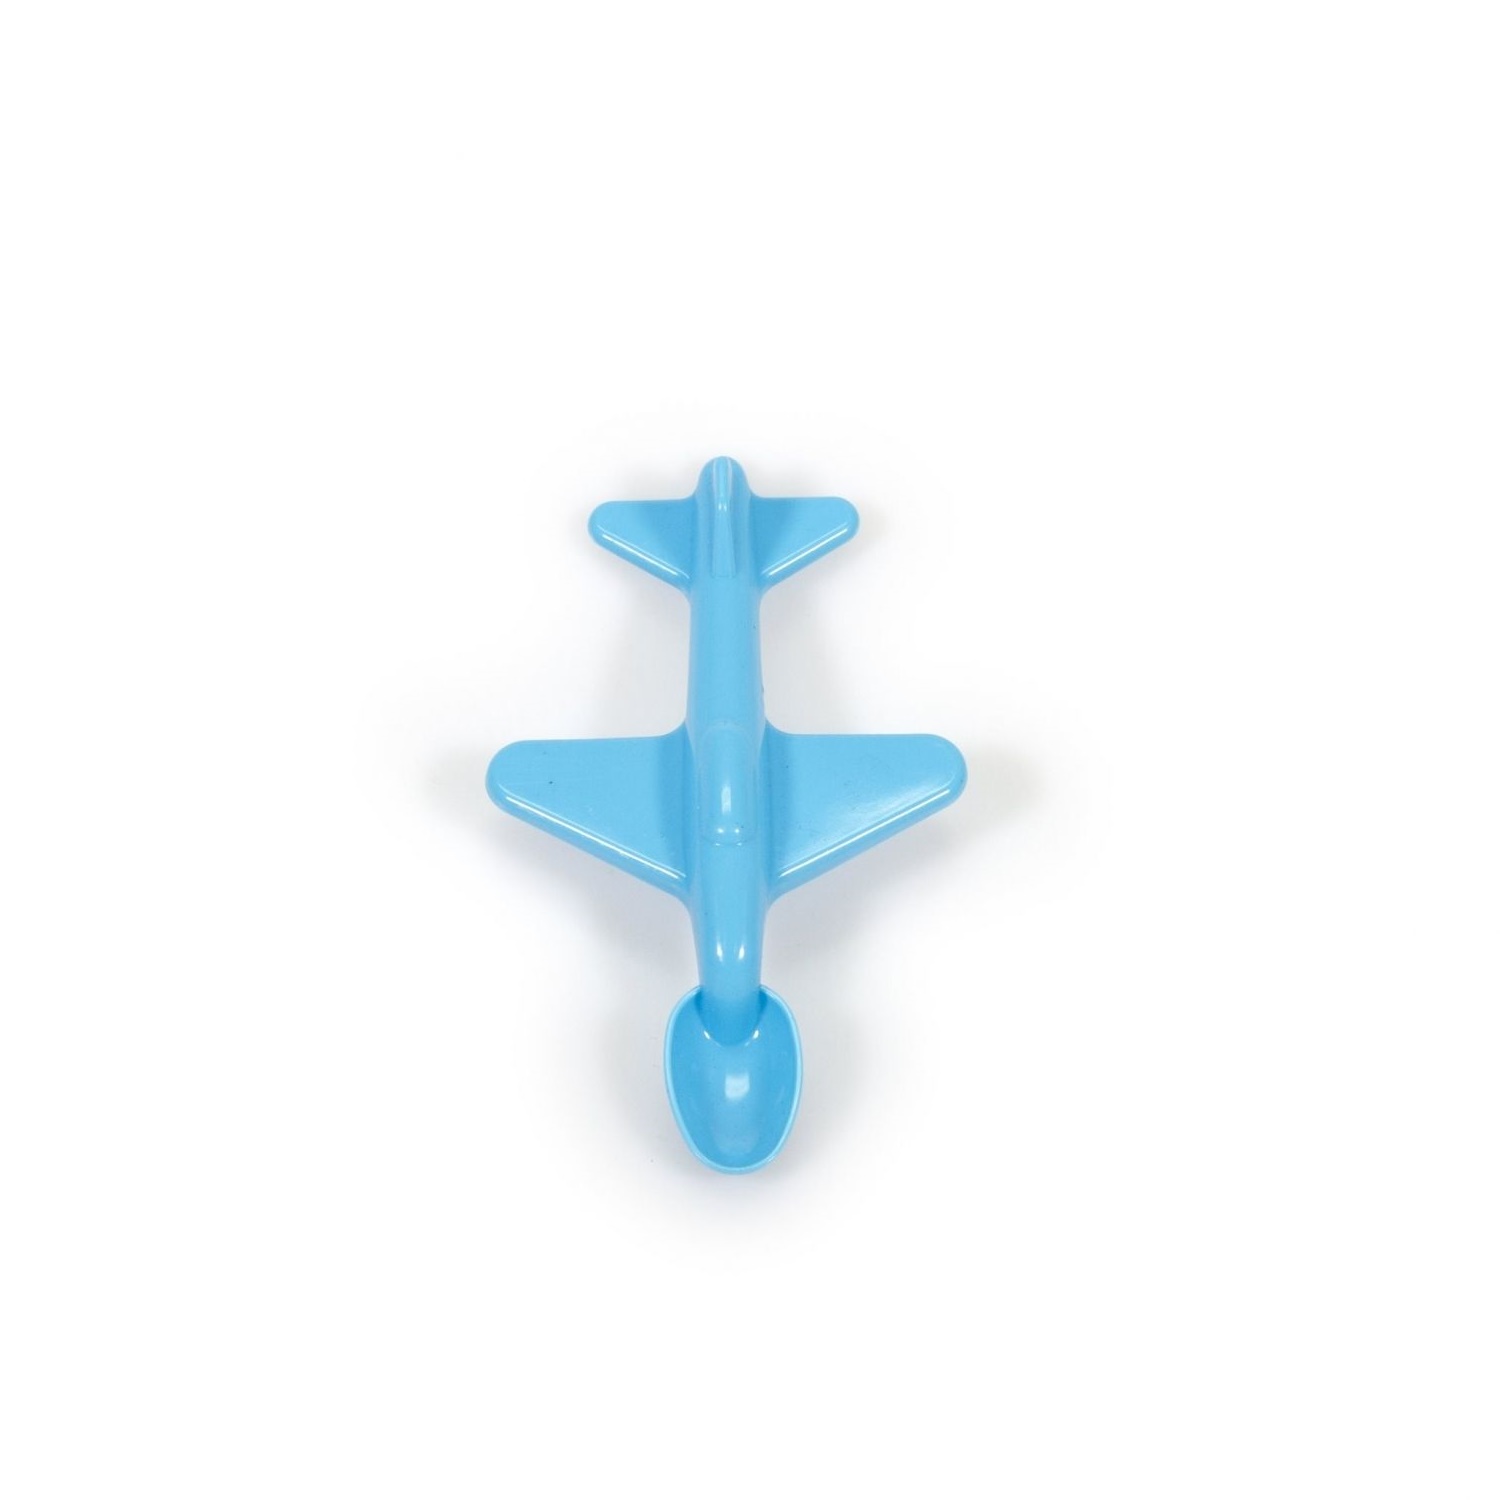 Spoon airoplane blue